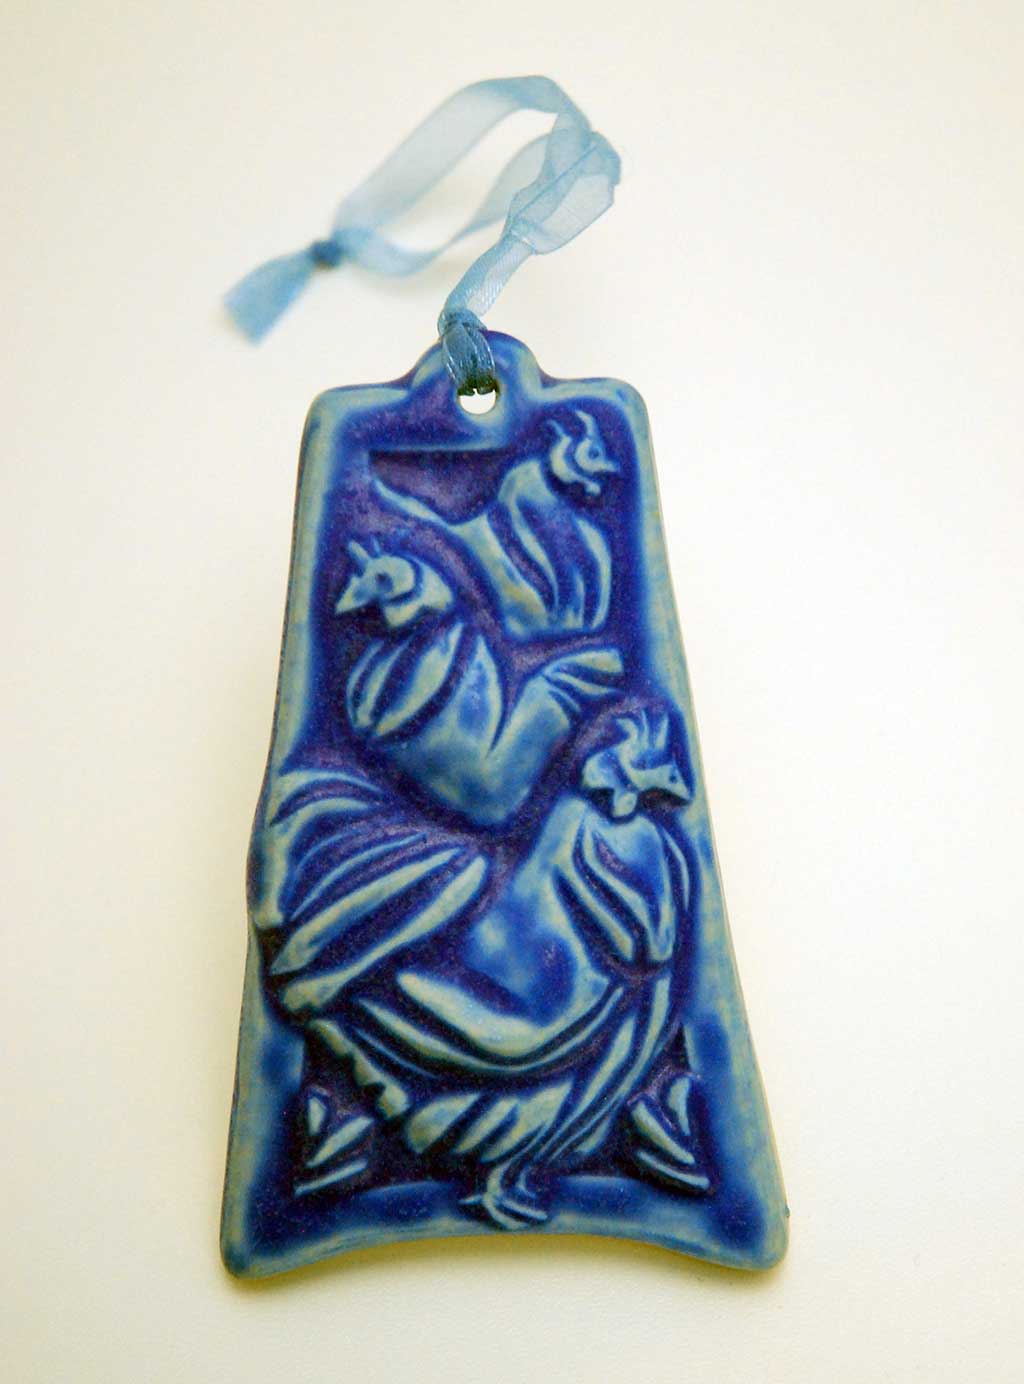 Pewabic, 12 Days of Christmas ornament (3 French Hens)